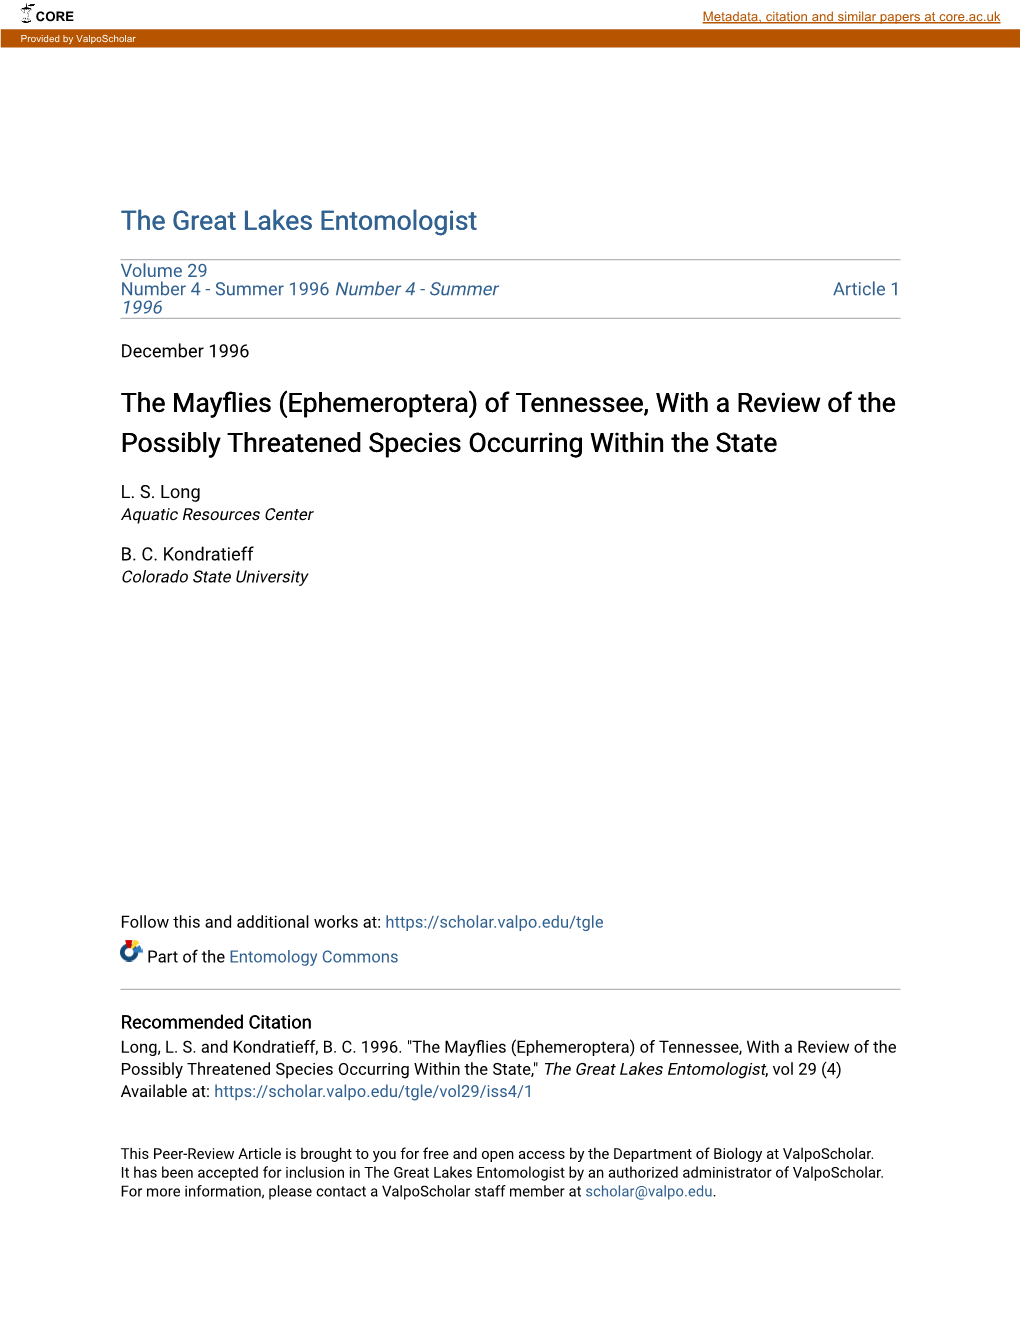 The Mayflies (Ephemeroptera) of Tennessee, with a Review of the Possibly Threatened Species Occurring Within the State